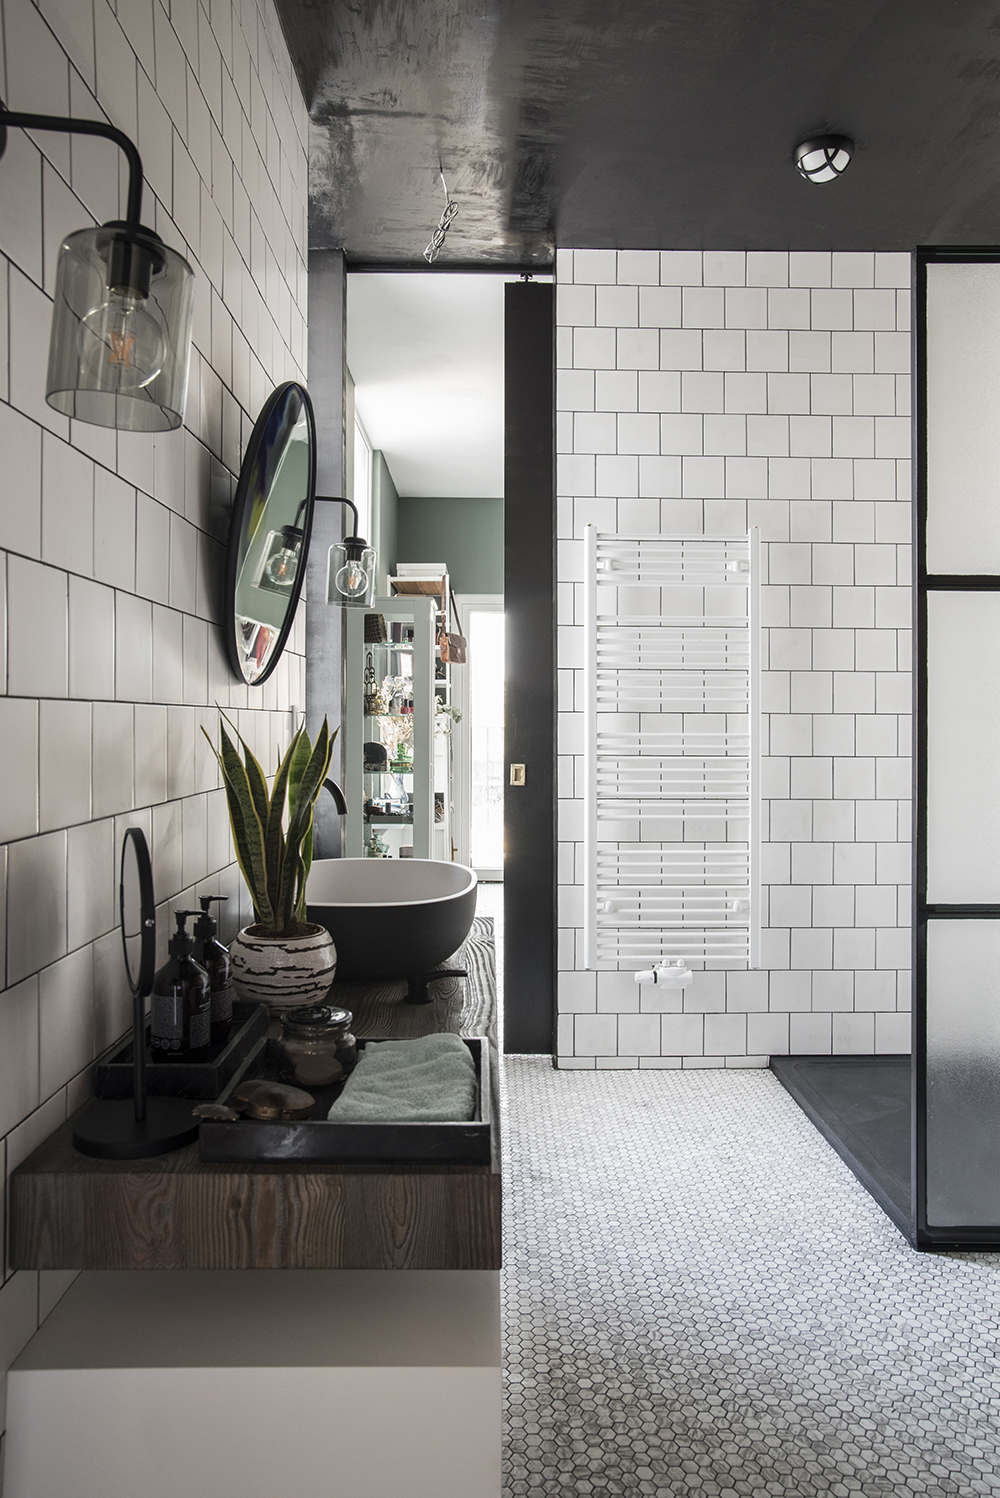 Black and white Bathroom with copper wall // Plants// Black dornbracht tara faucets